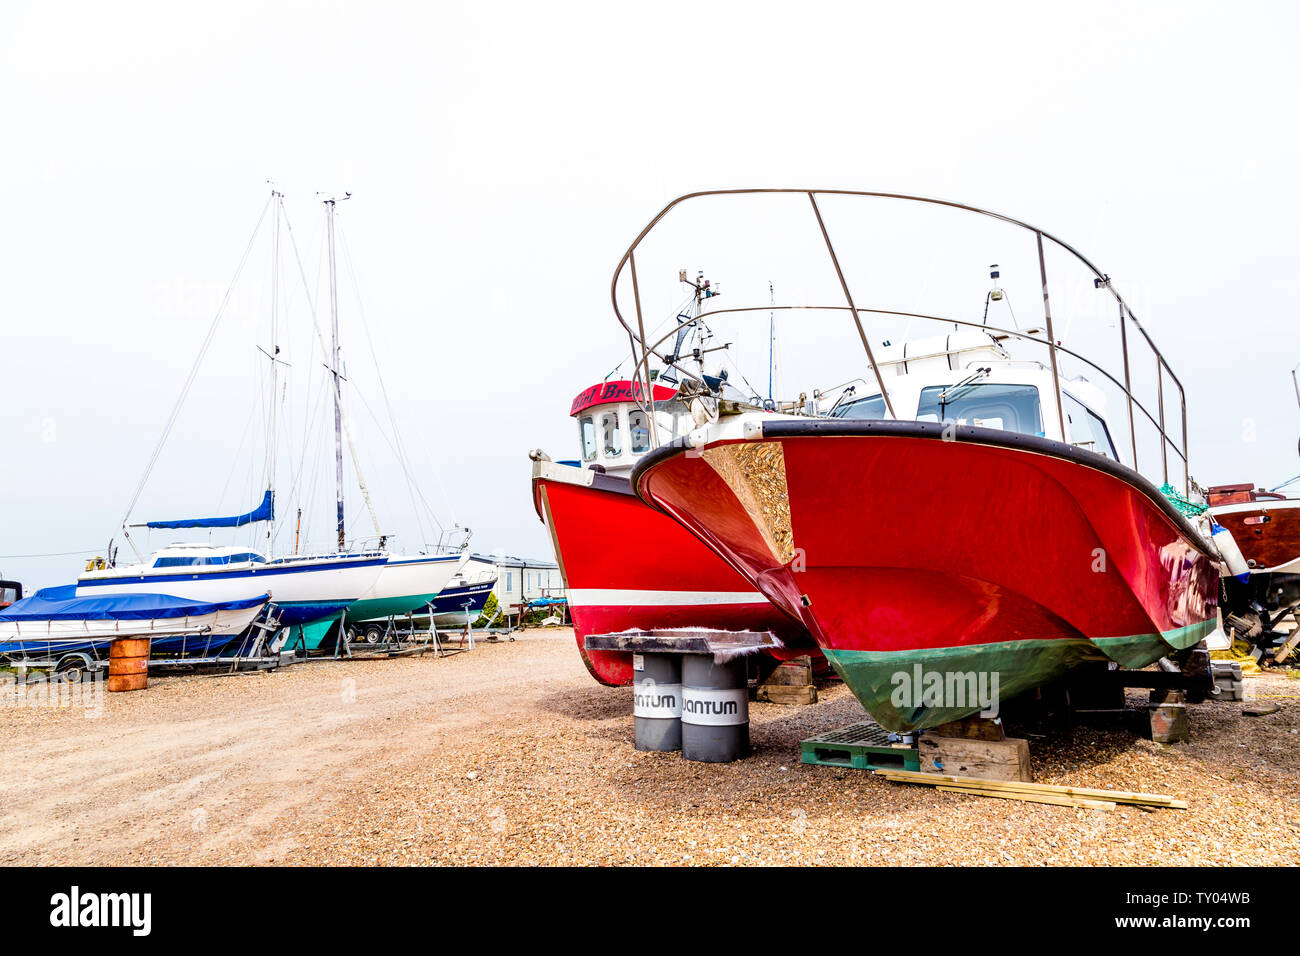 Boats at the Ferry Boat Yard in Felixstowe, Suffolk, UK Stock Photo